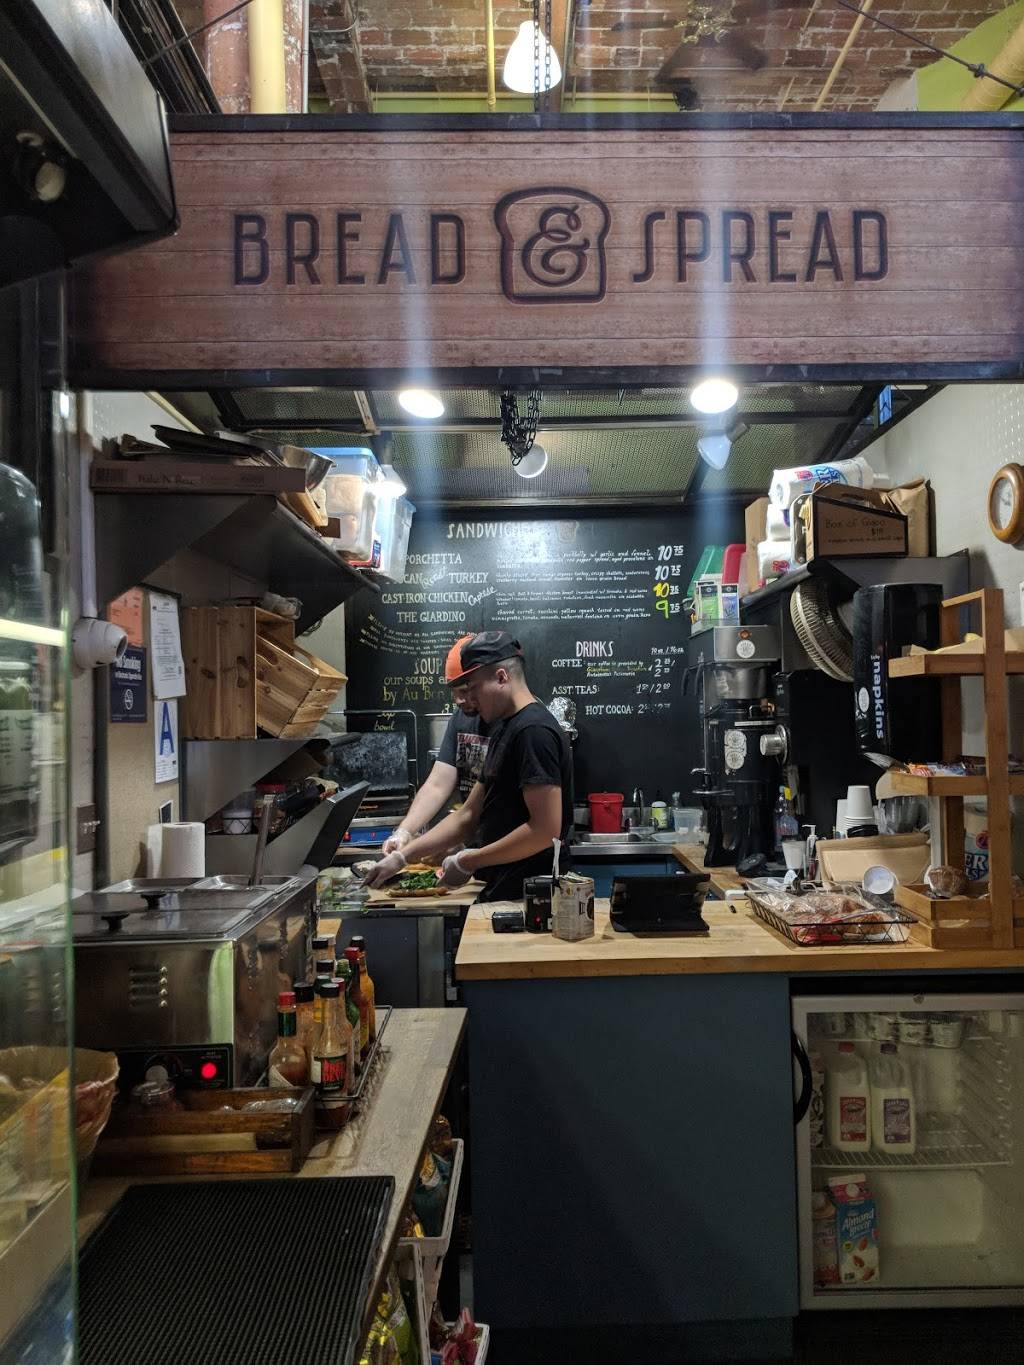 Bread & Spread | restaurant | 151 Front St, Brooklyn, NY 11201, USA | 7186252220 OR +1 718-625-2220